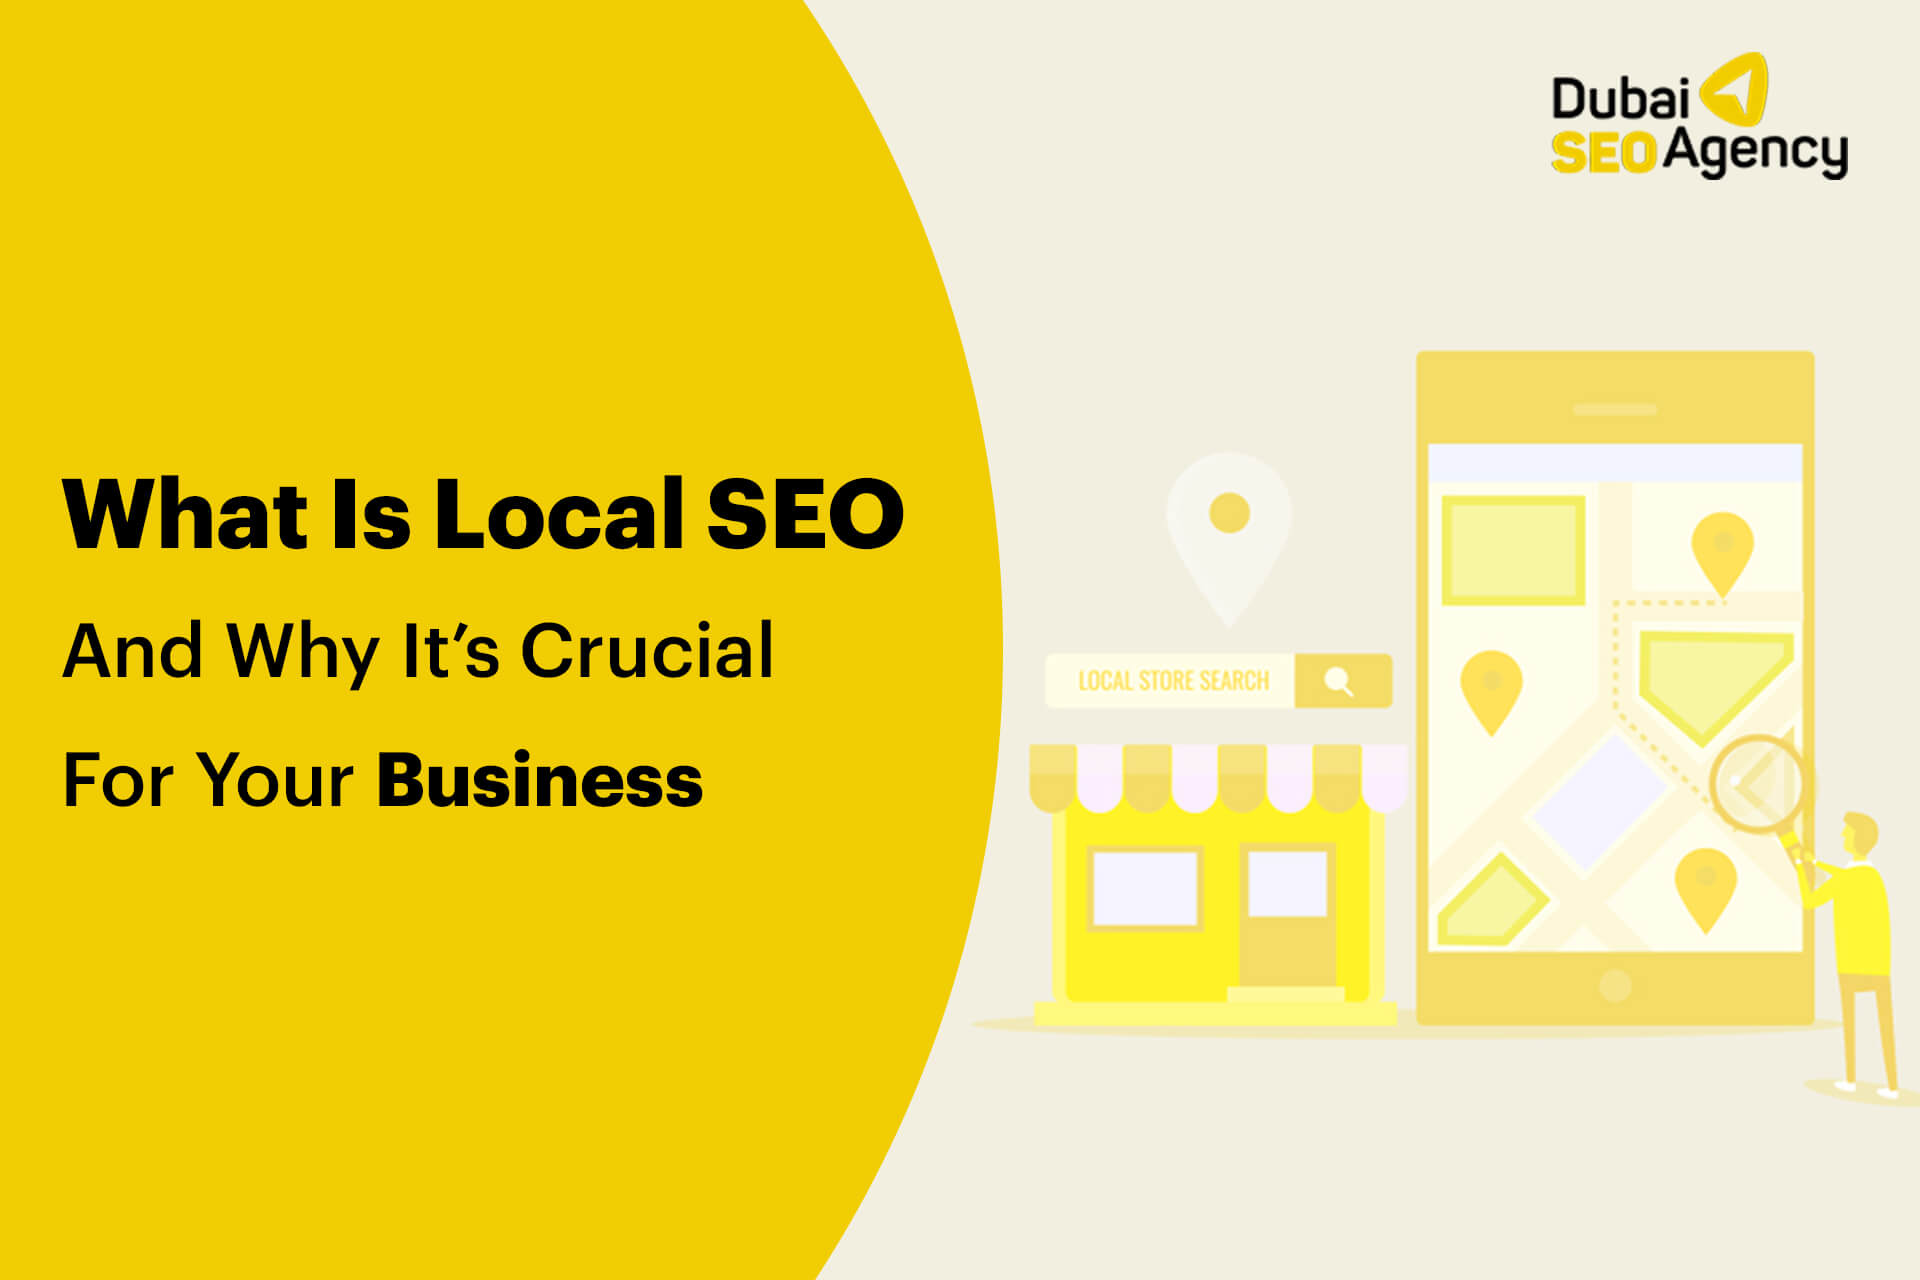 What Is Local SEO And Why It’s Crucial For Your Business